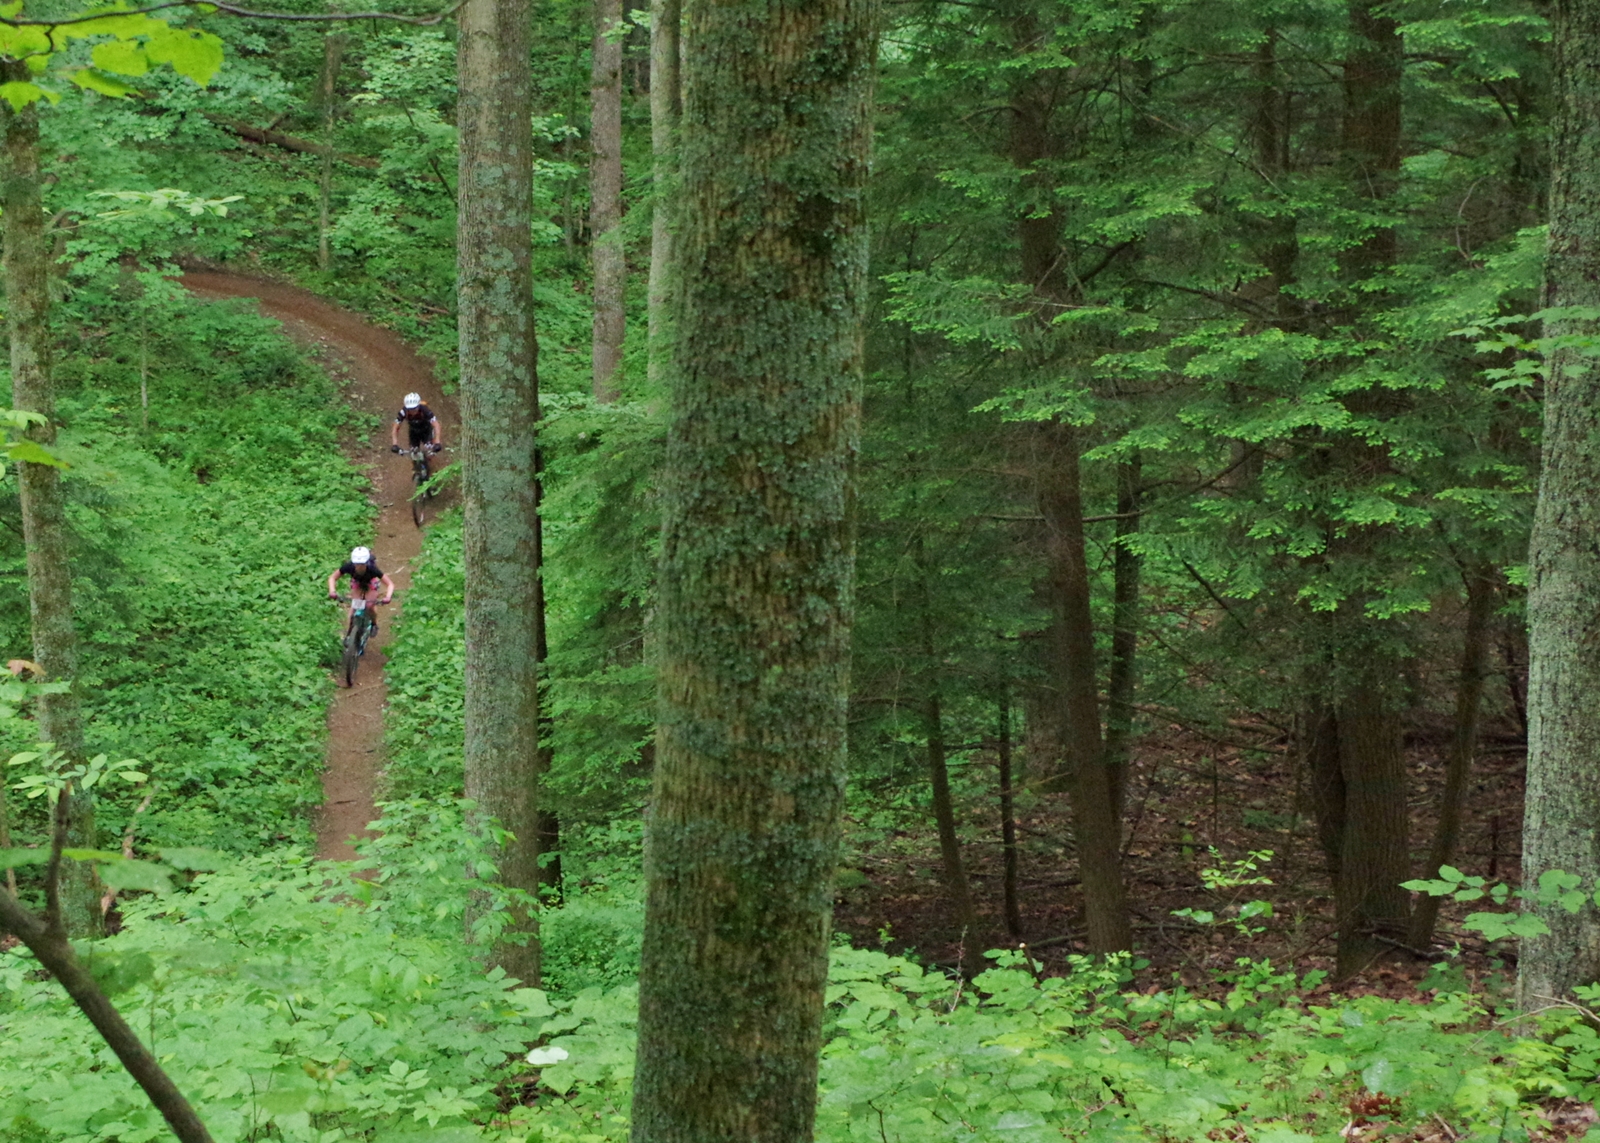 Lush green forest with moss-covered tree in foreground, two mountain bikers descending hill in far background